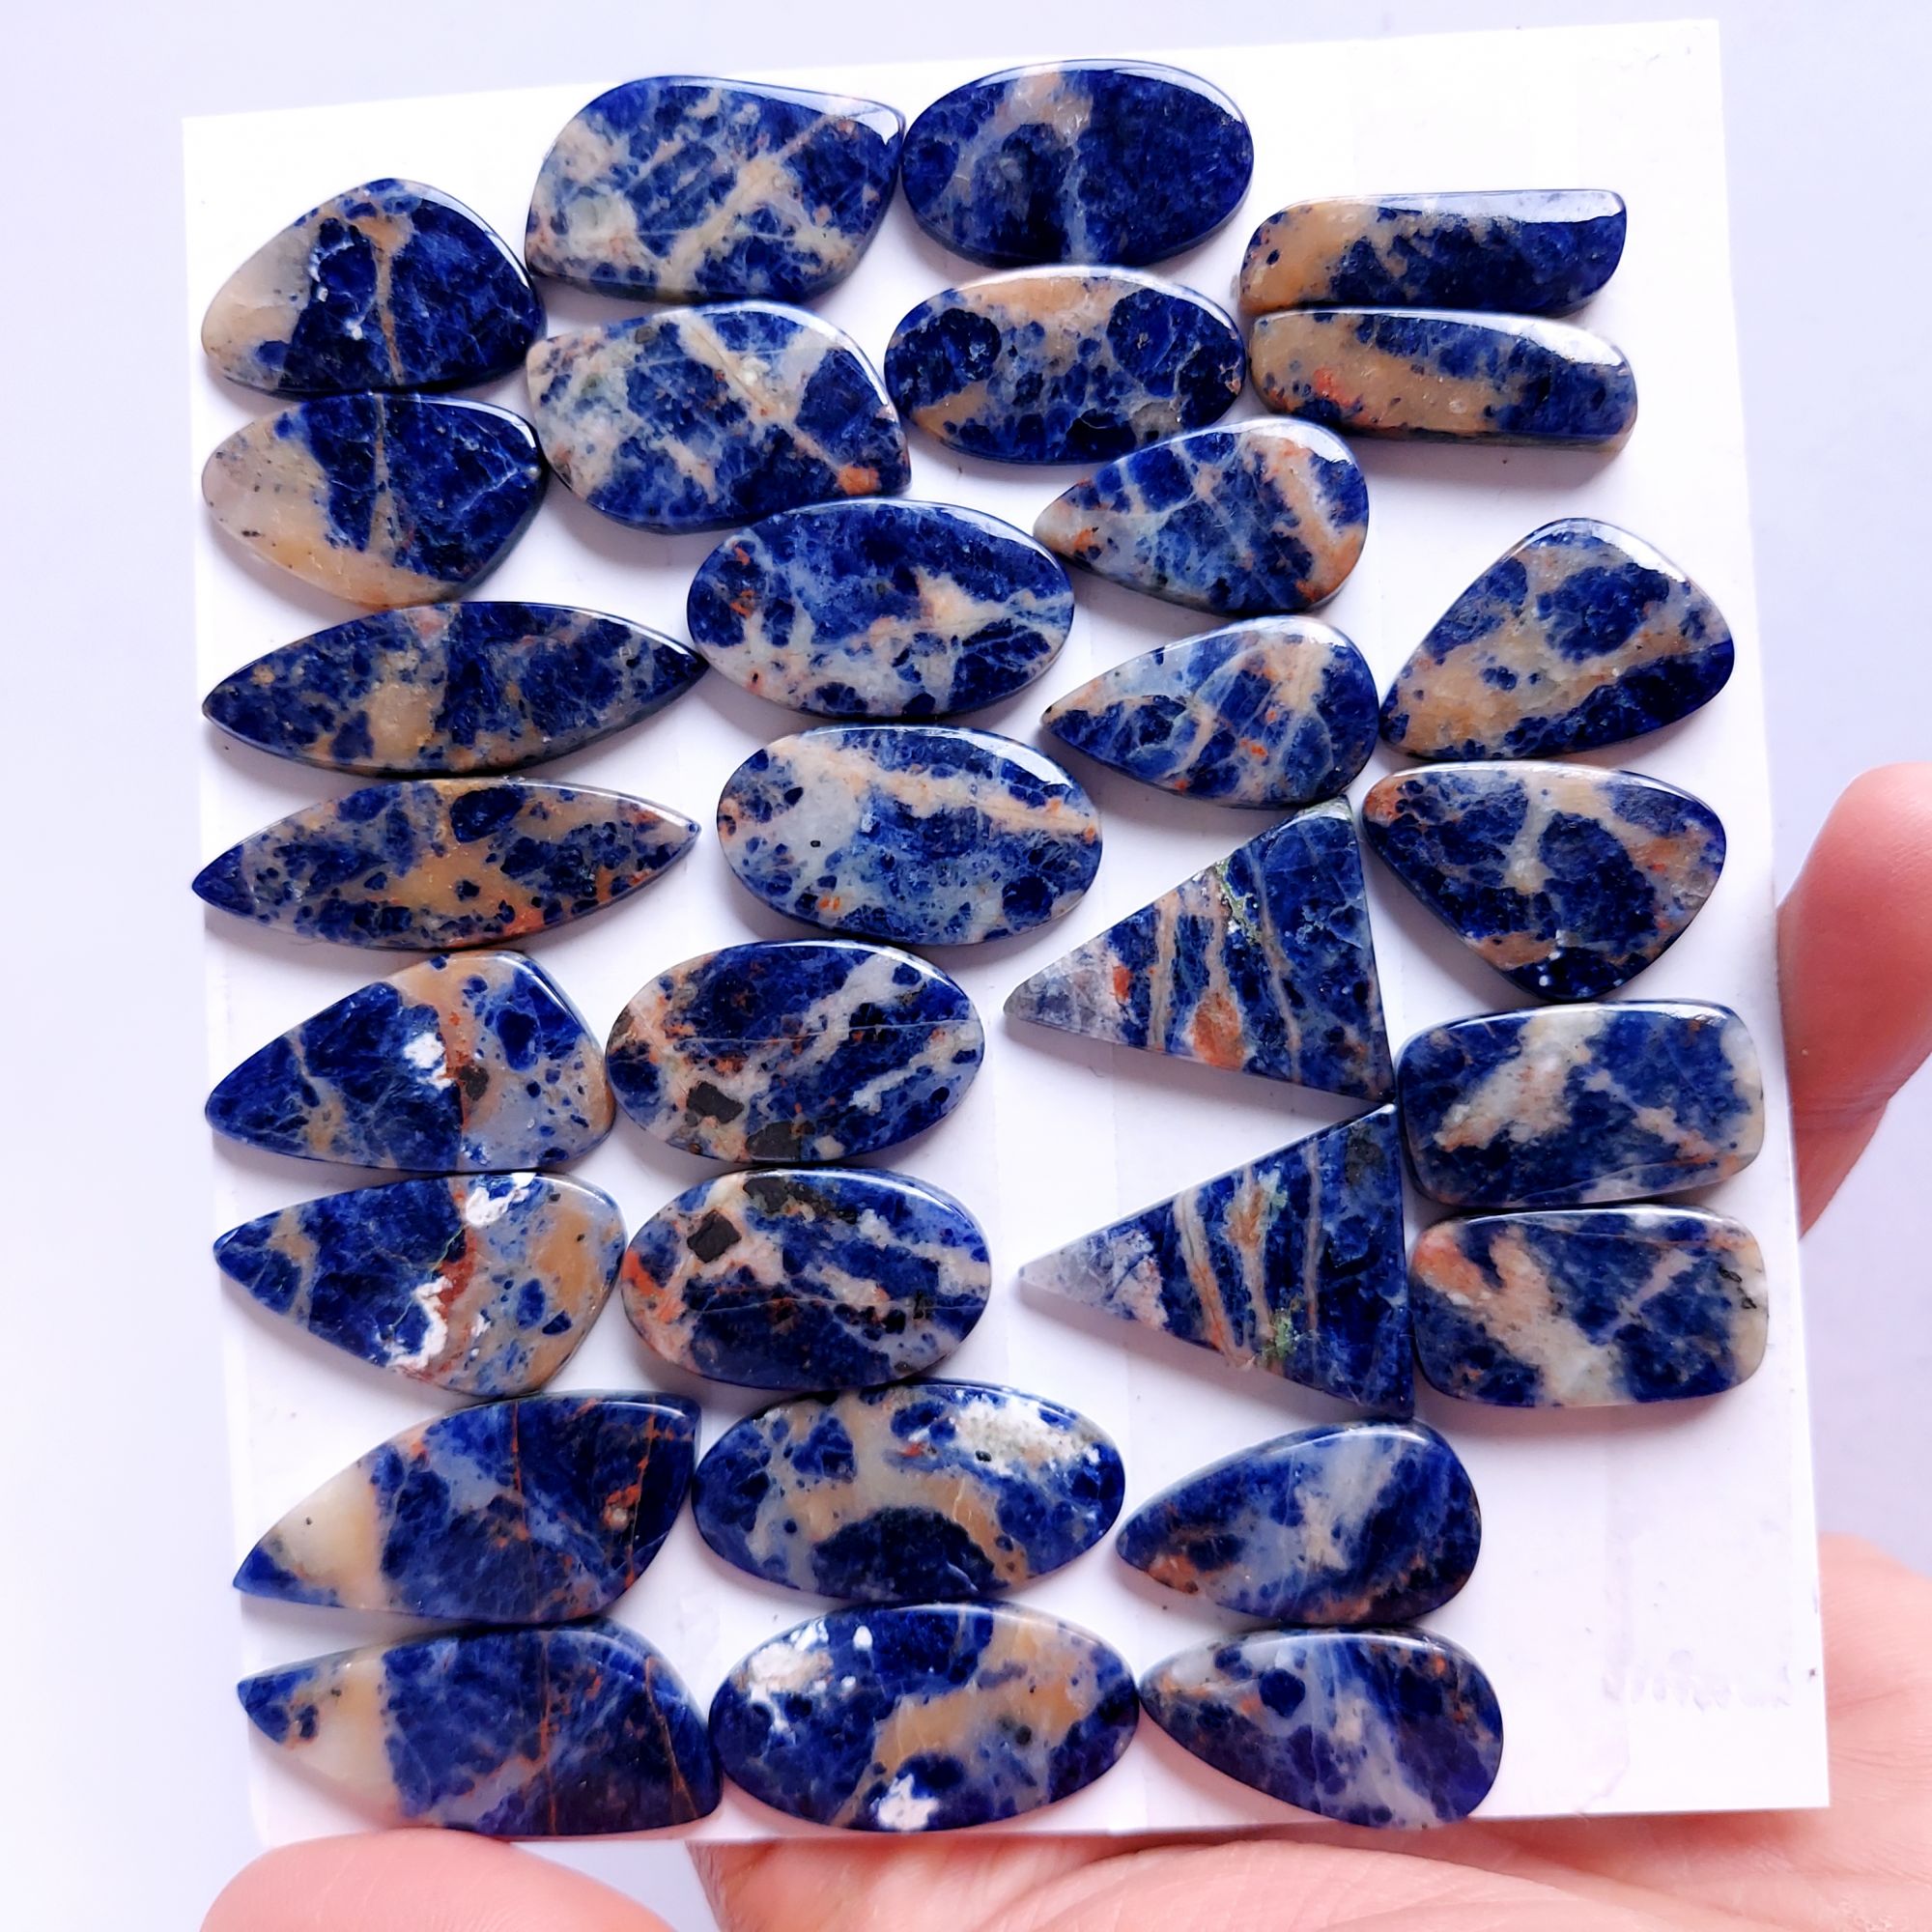 15 Pair 335Cts Natural Sodalite Cabochon Pair Loose Gemstone For Jewelry Wholesale Lot Size 35x12 24x13mm